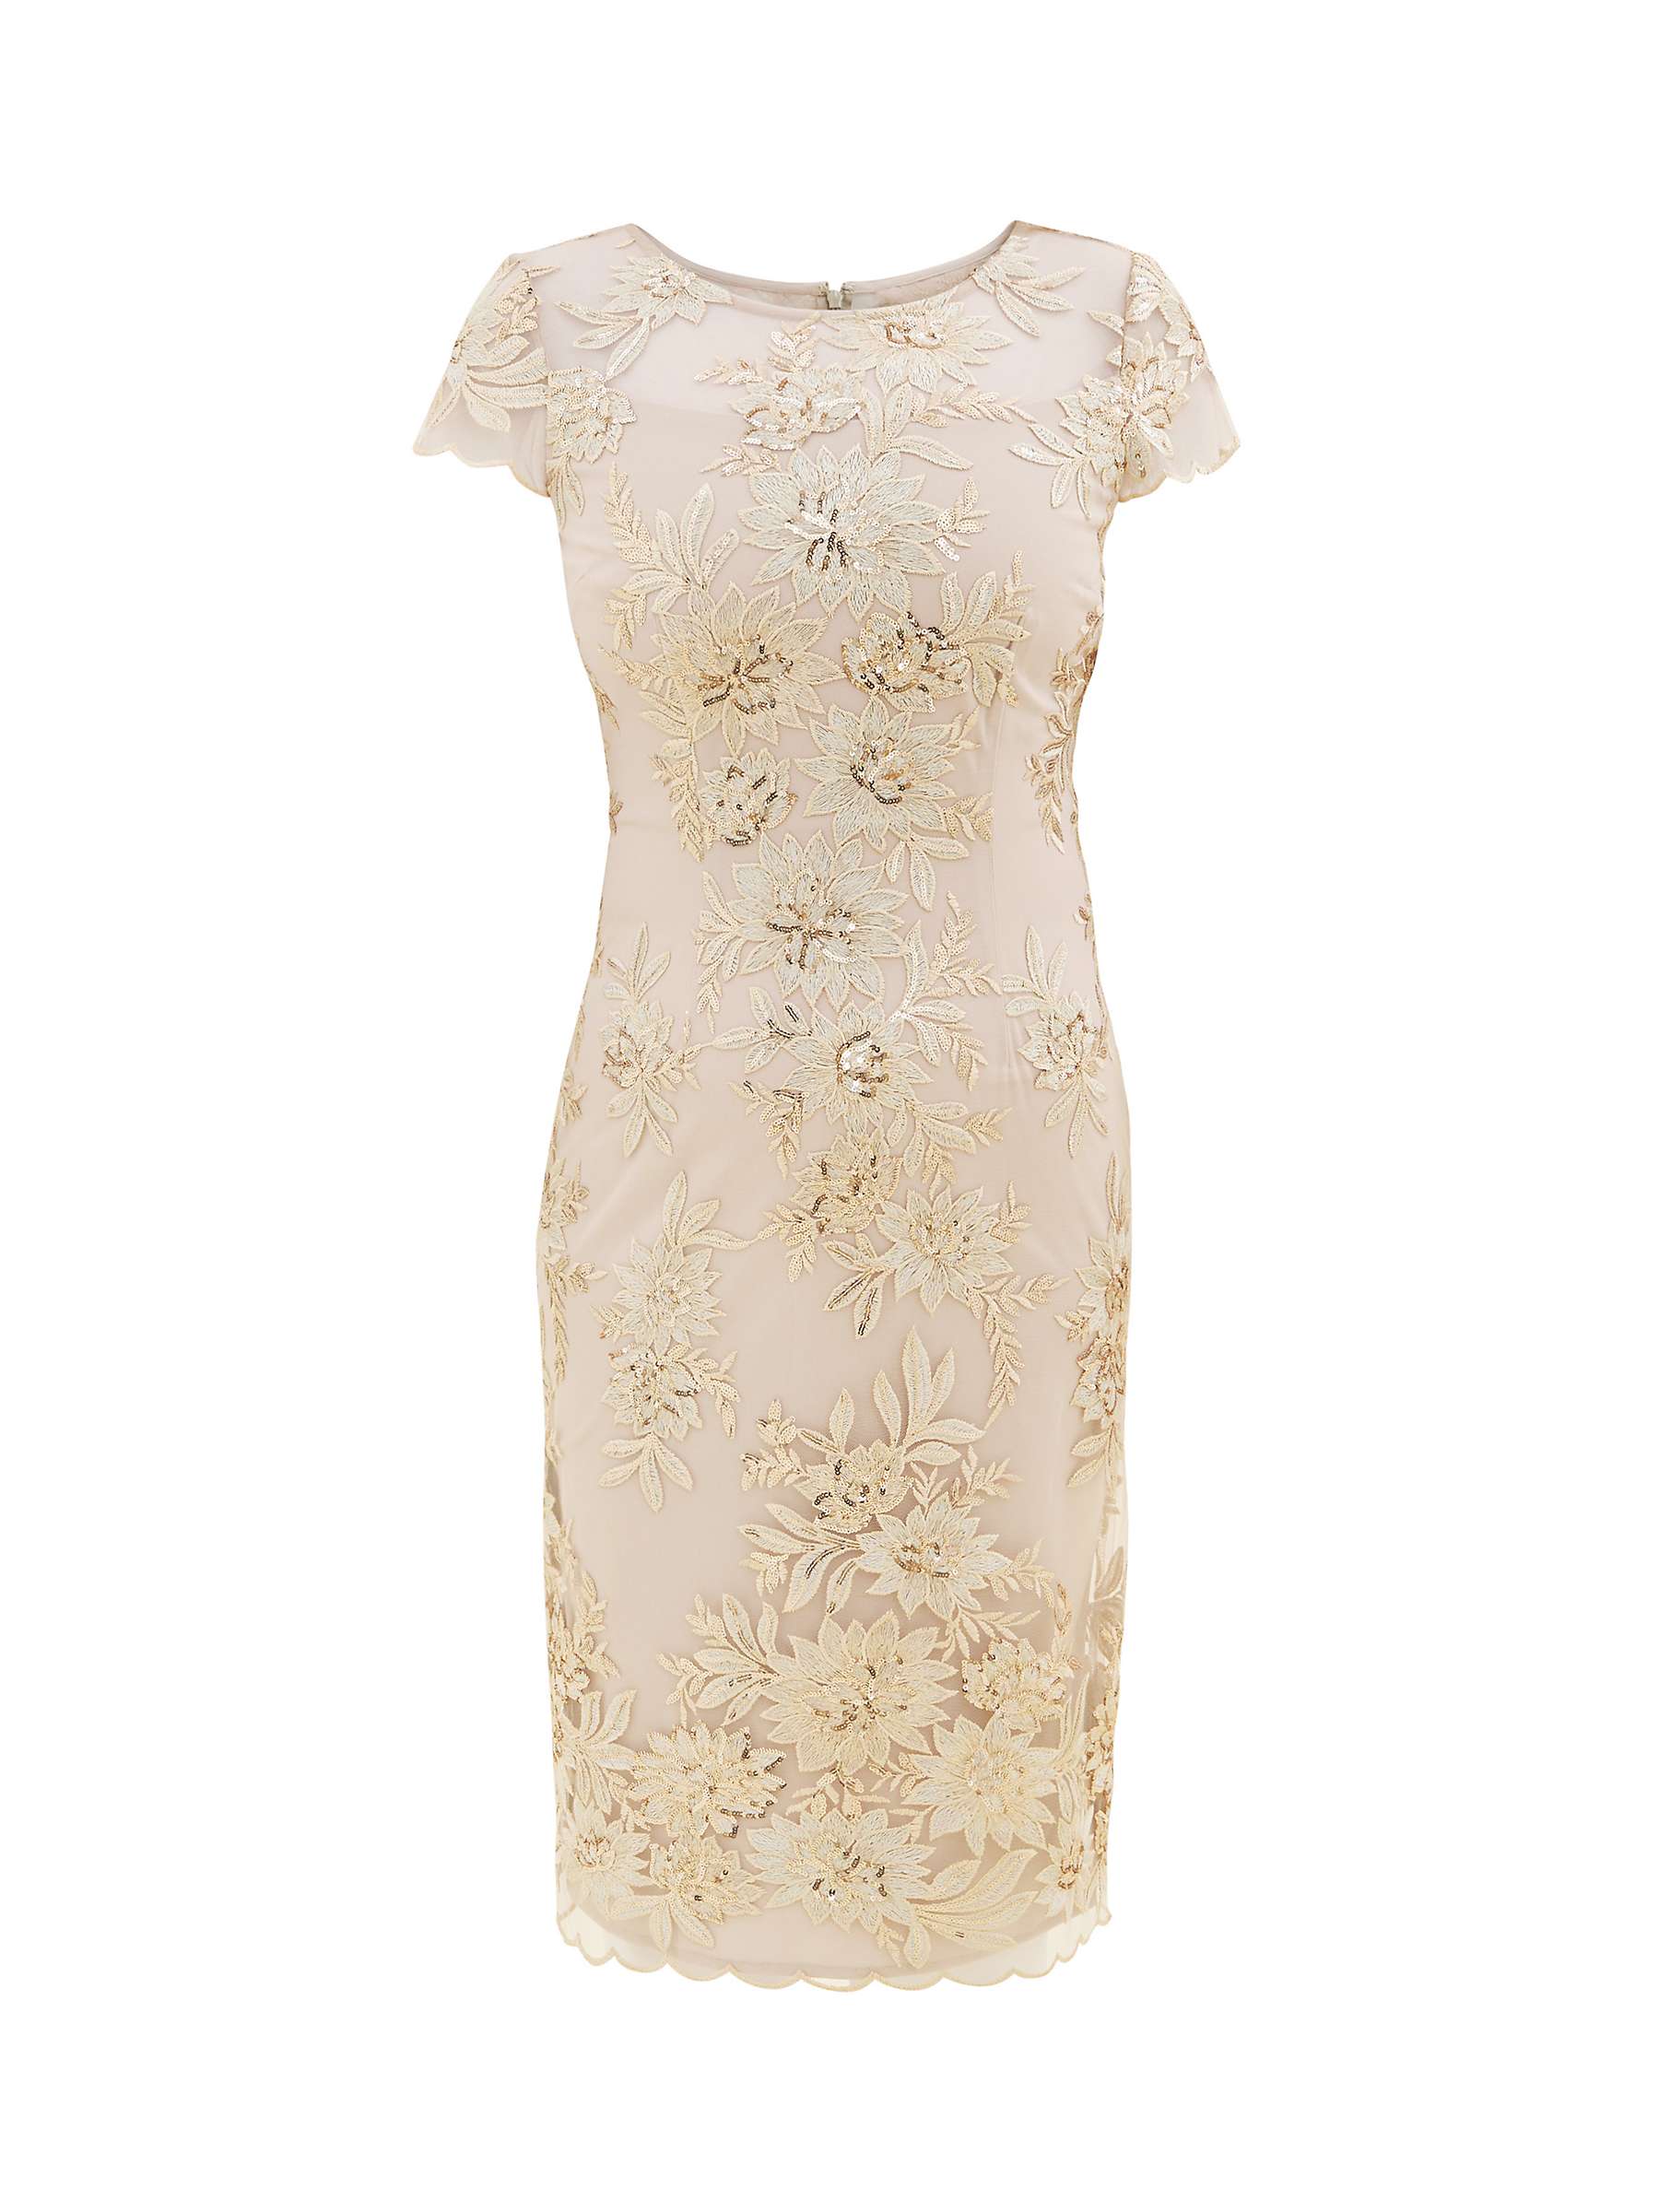 Gina Bacconi Edna Embroidered Dress, Champagne at John Lewis & Partners